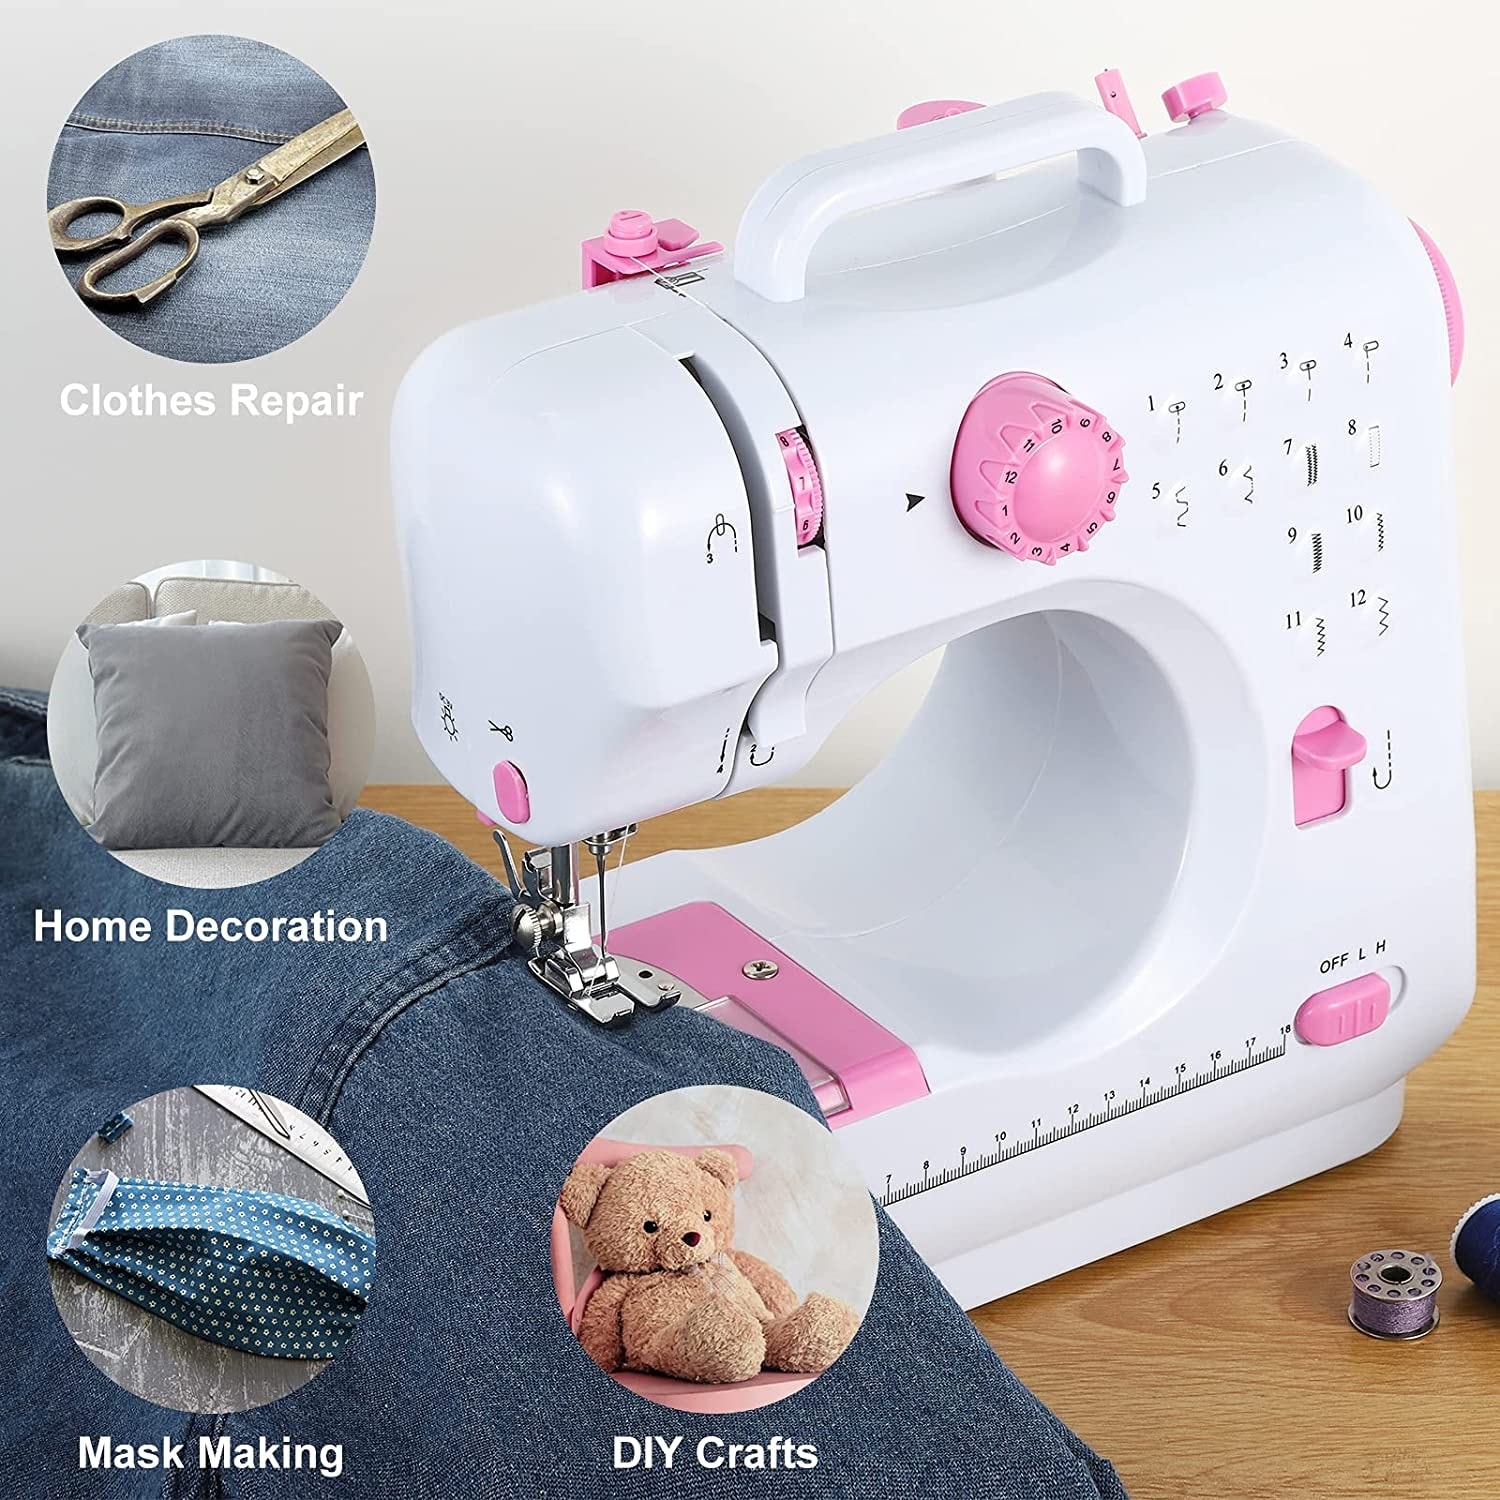 Kids Sewing Machine with 12 Built-In Stitches, Foot Pedal - On